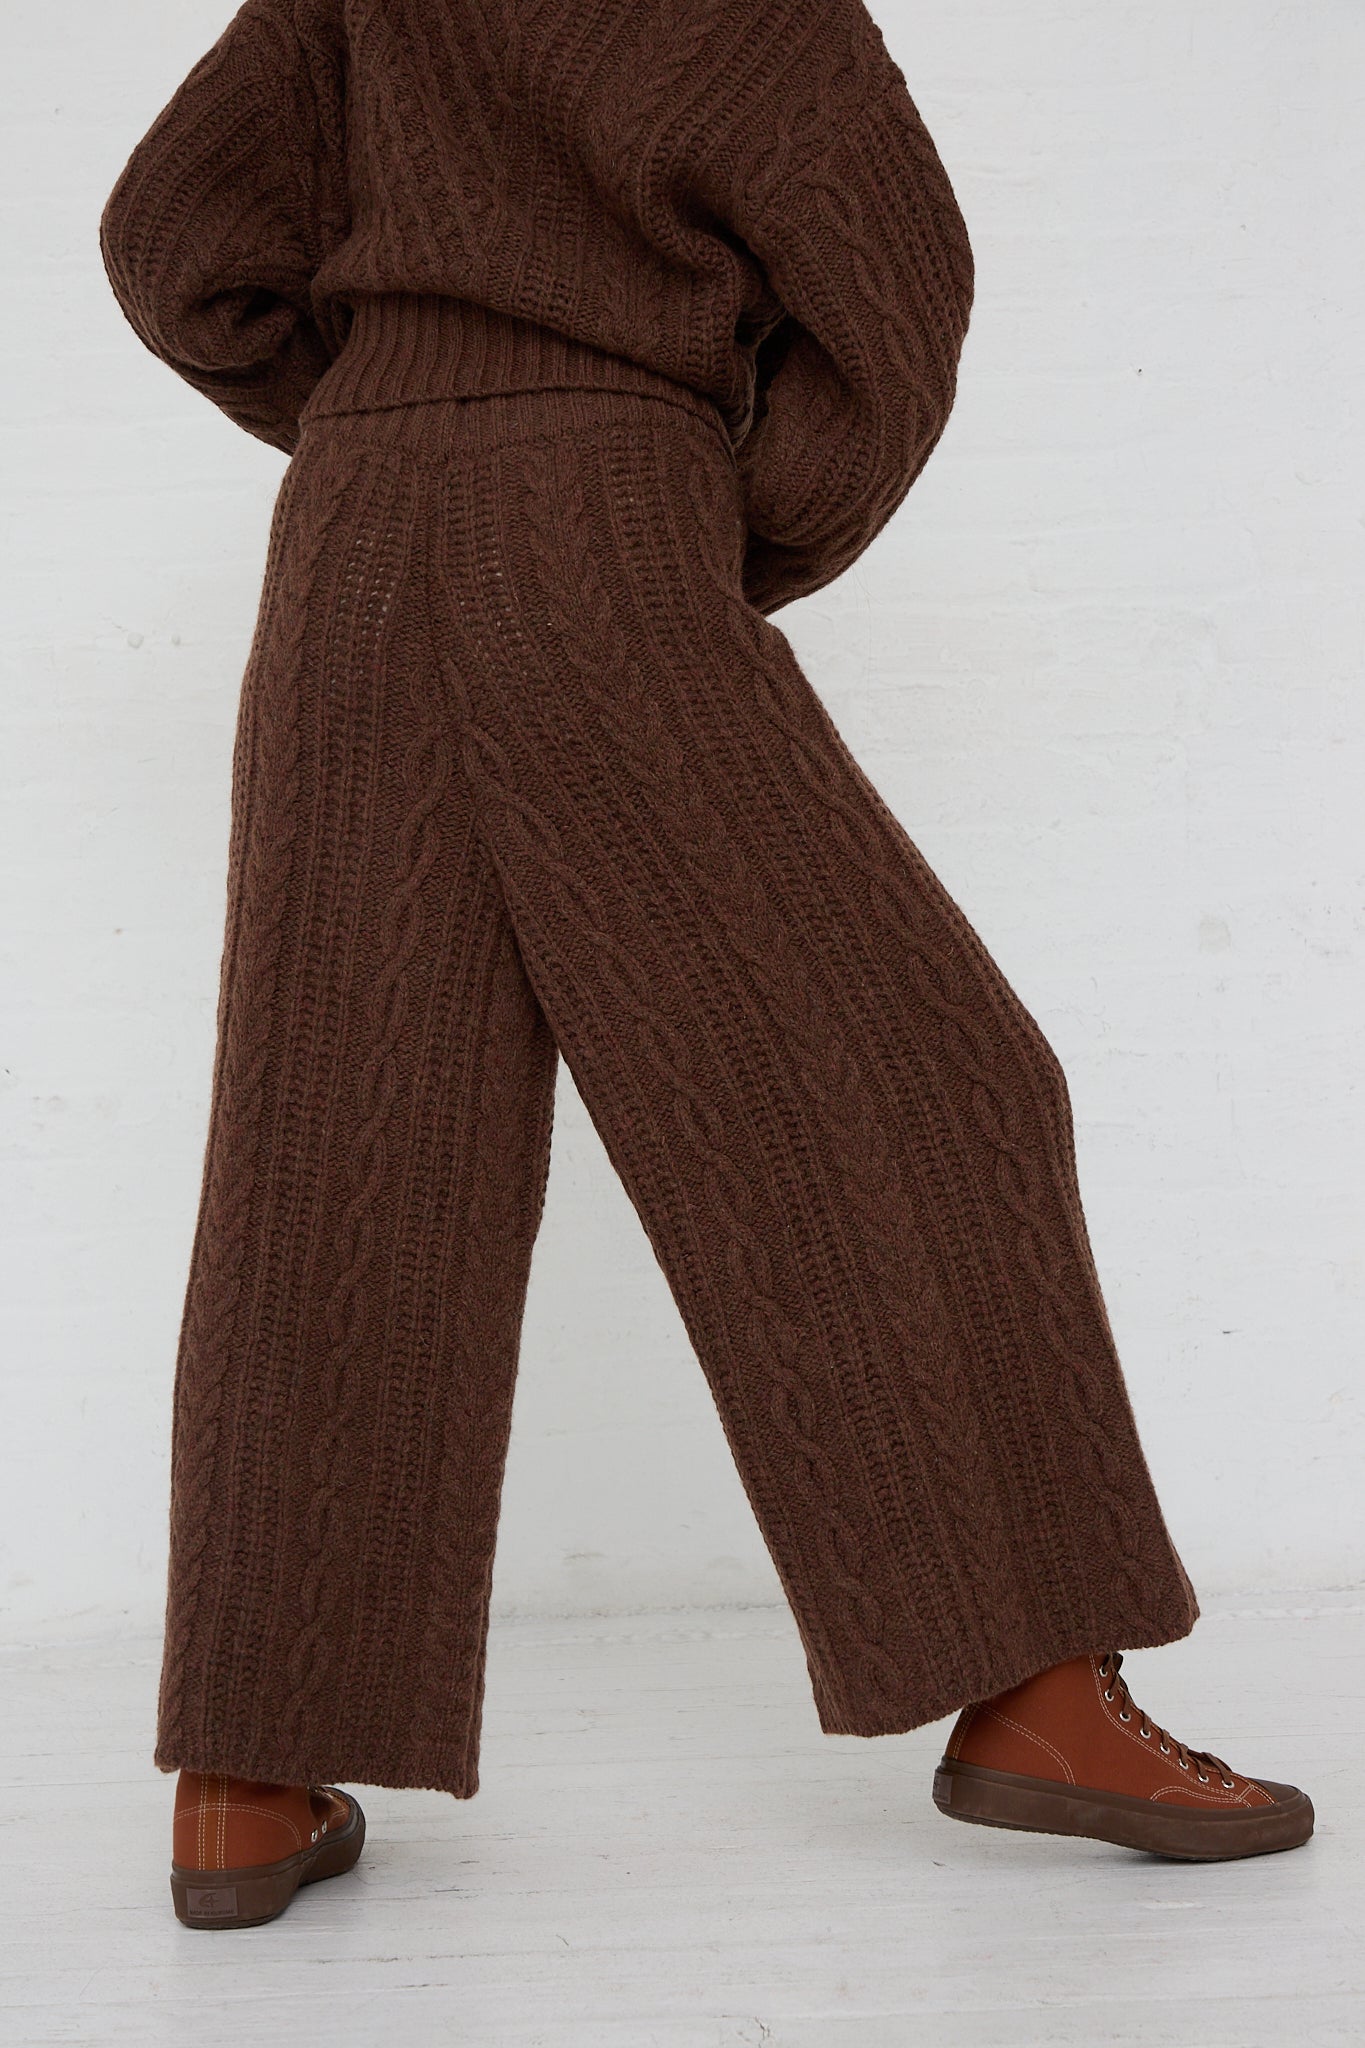 A woman wearing an Ichi Knit Pant in Brown sweater. Back view.